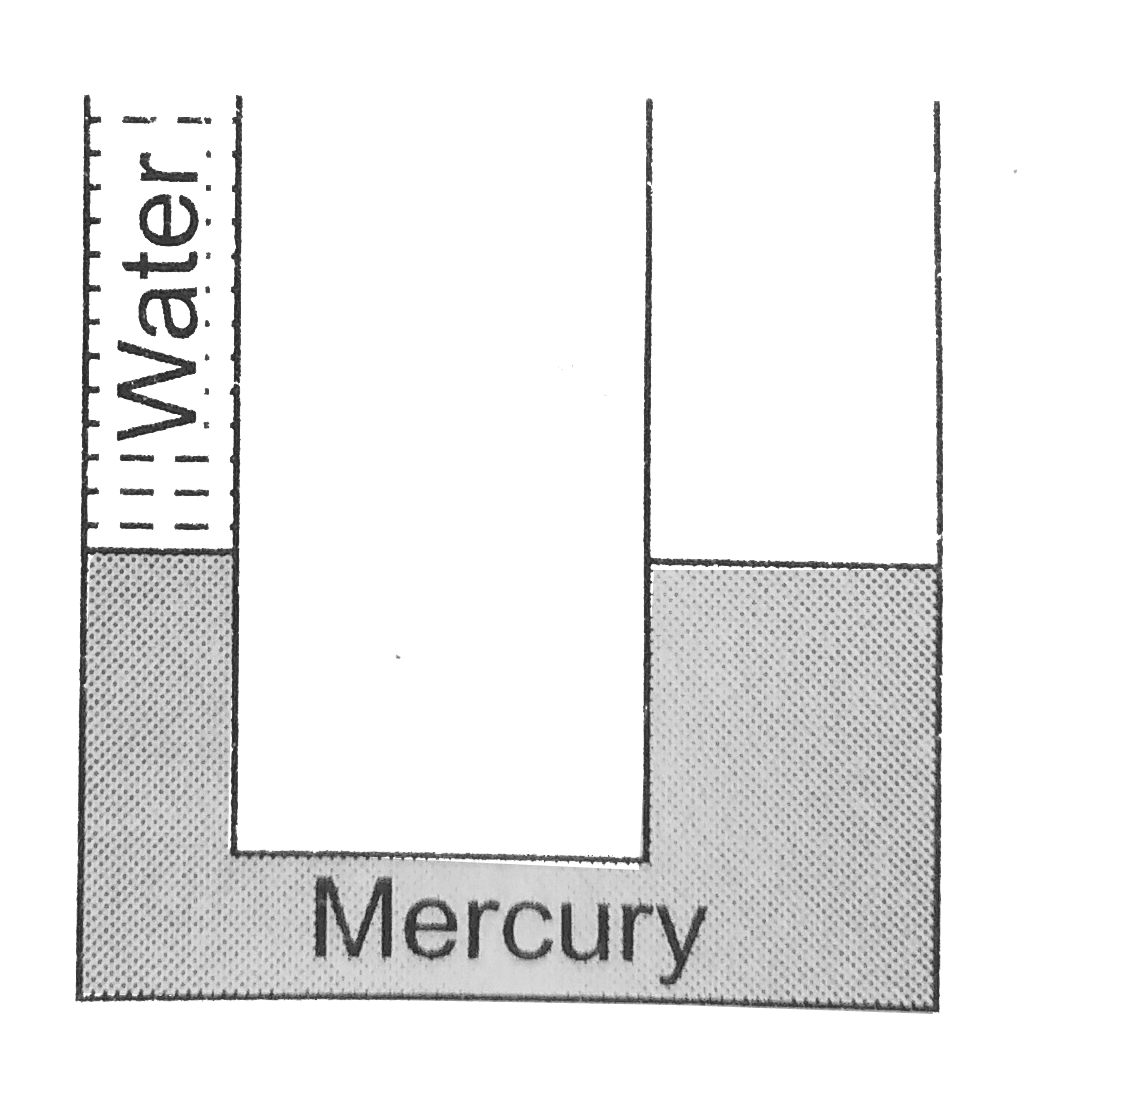 A U -tube in which the cross - sectional area of the limb on the left is one quarter, the limb on the right contains mercury (density 13.6 g//cm^3). The level of mercury  in the narrow limb is at a distance of 36 cm from  the upper end of the tube. What will be the rise in the level of mercury in the right limb if the left limb is filled to the top with water ?